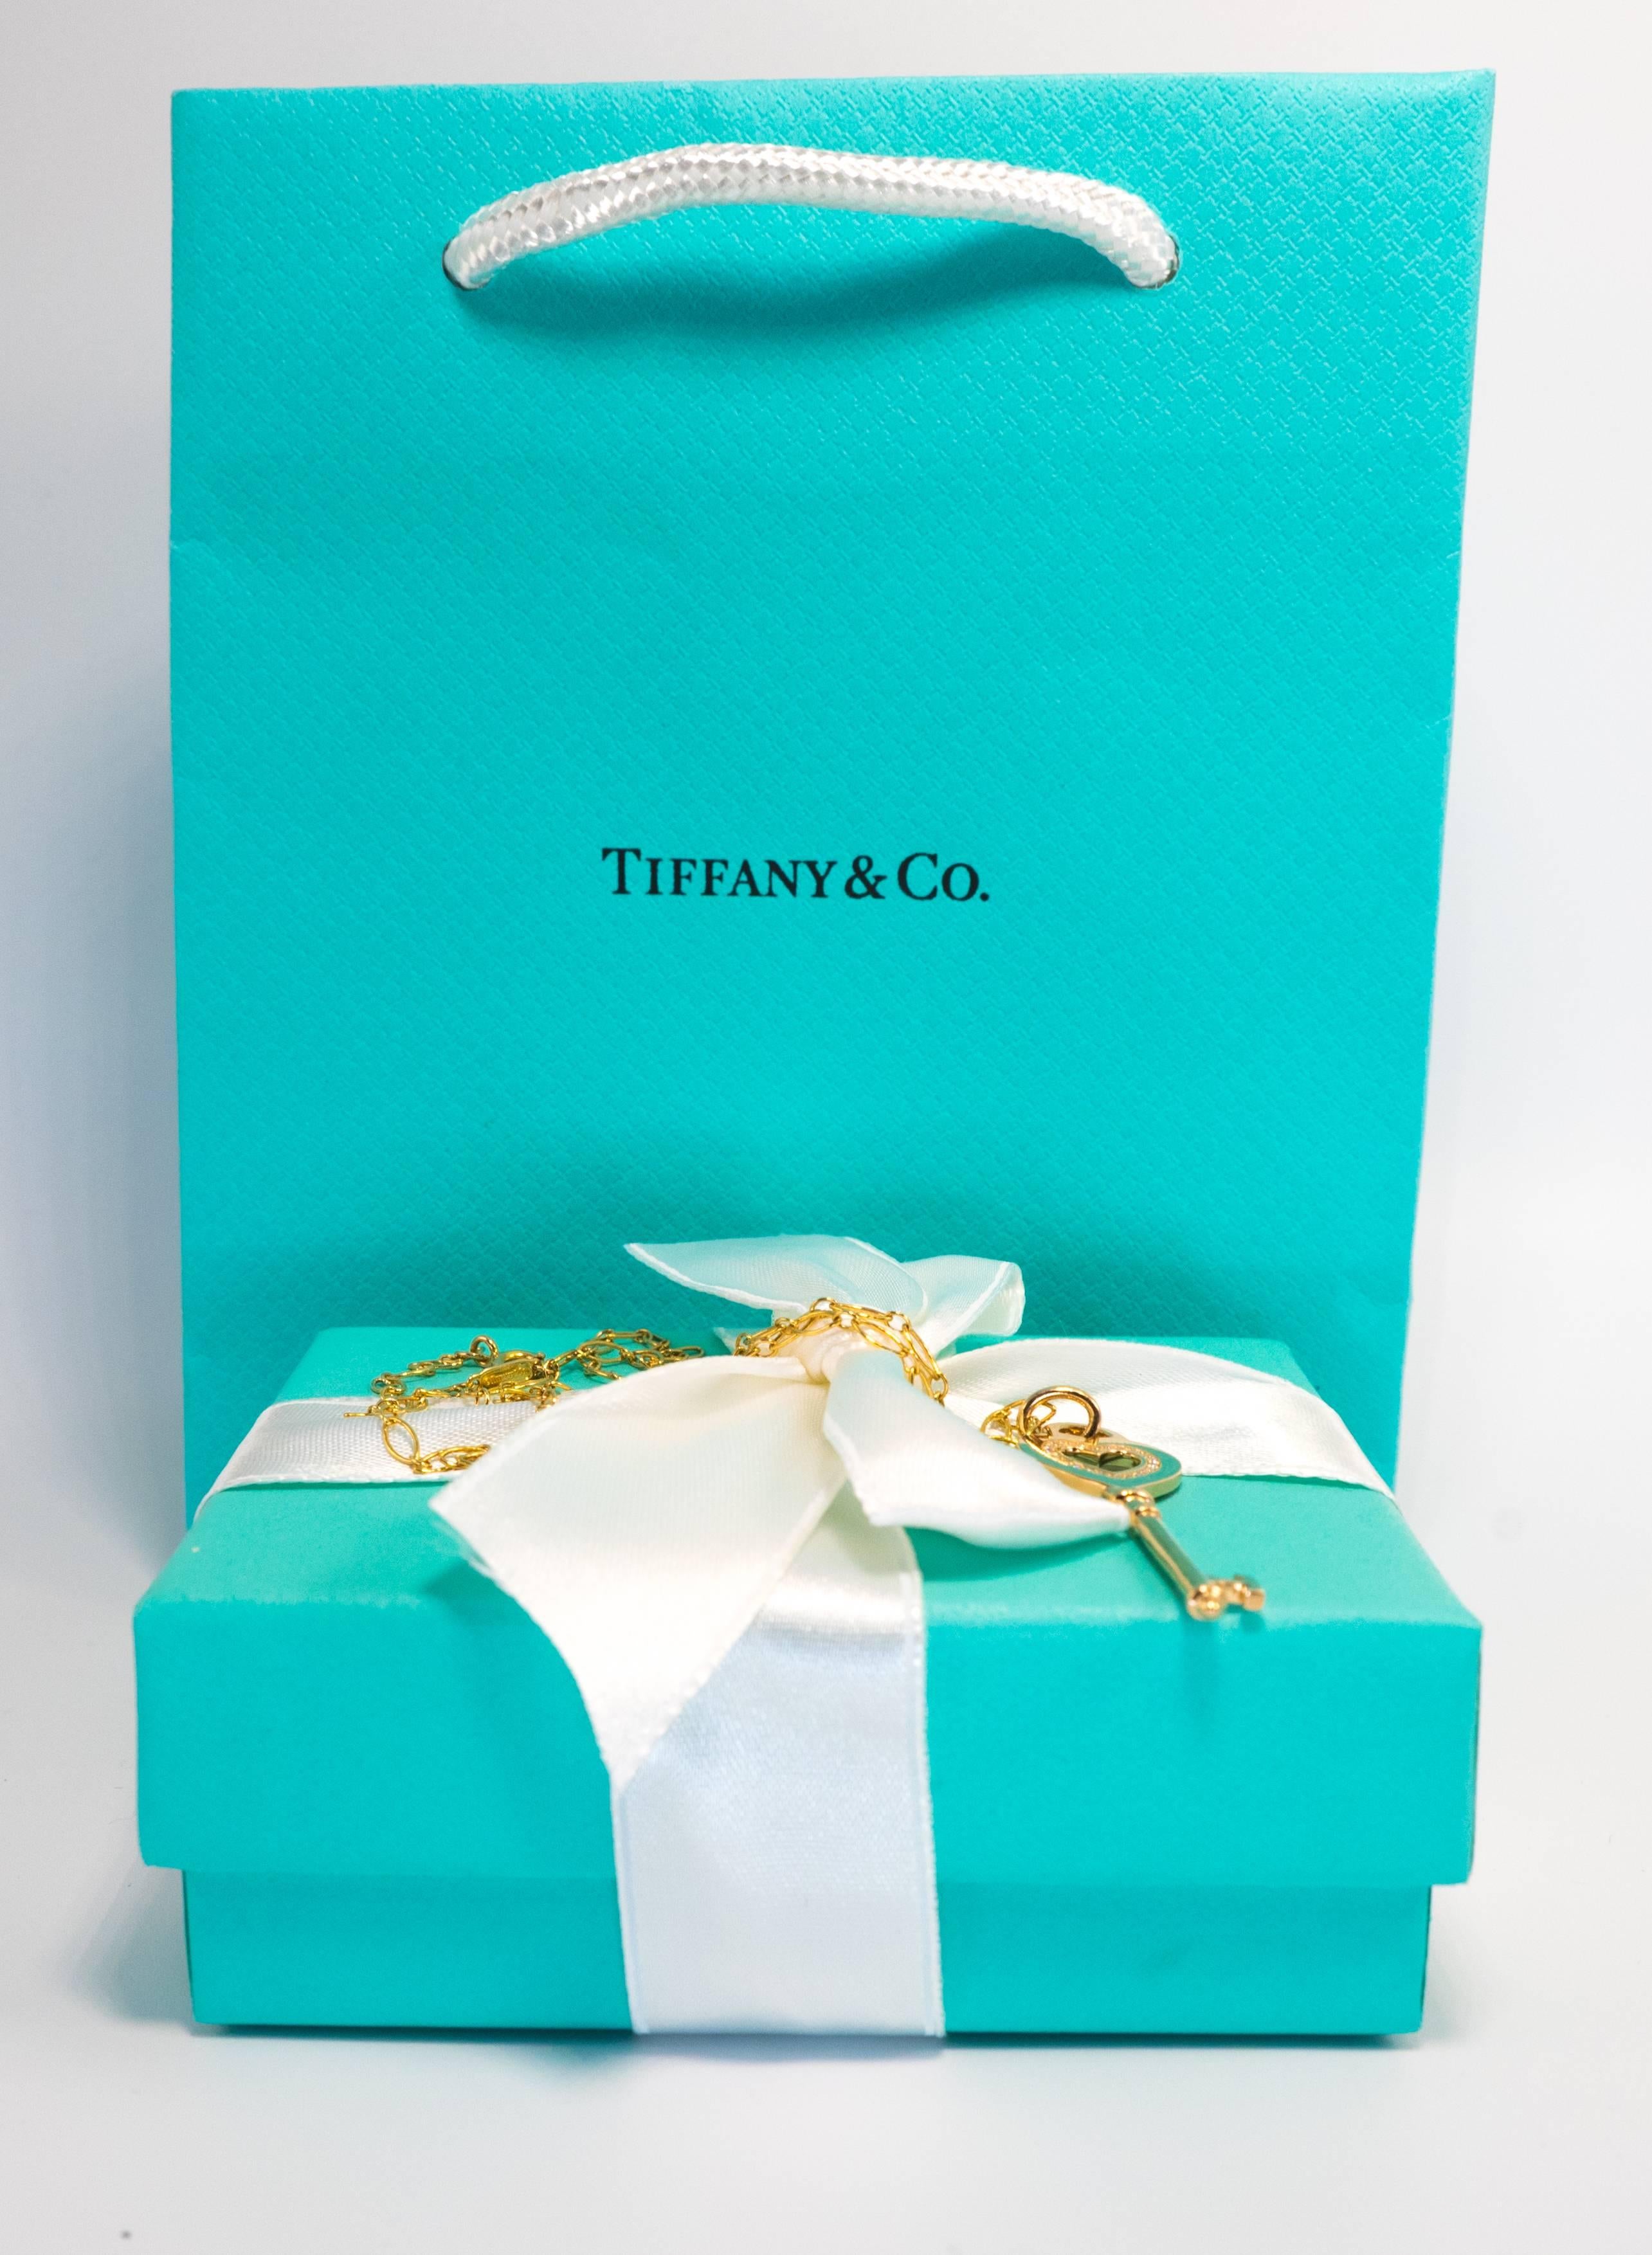 Round Cut Tiffany & Co. Heart Key Pendant with Diamonds and Chain in 18 Karat Yellow Gold